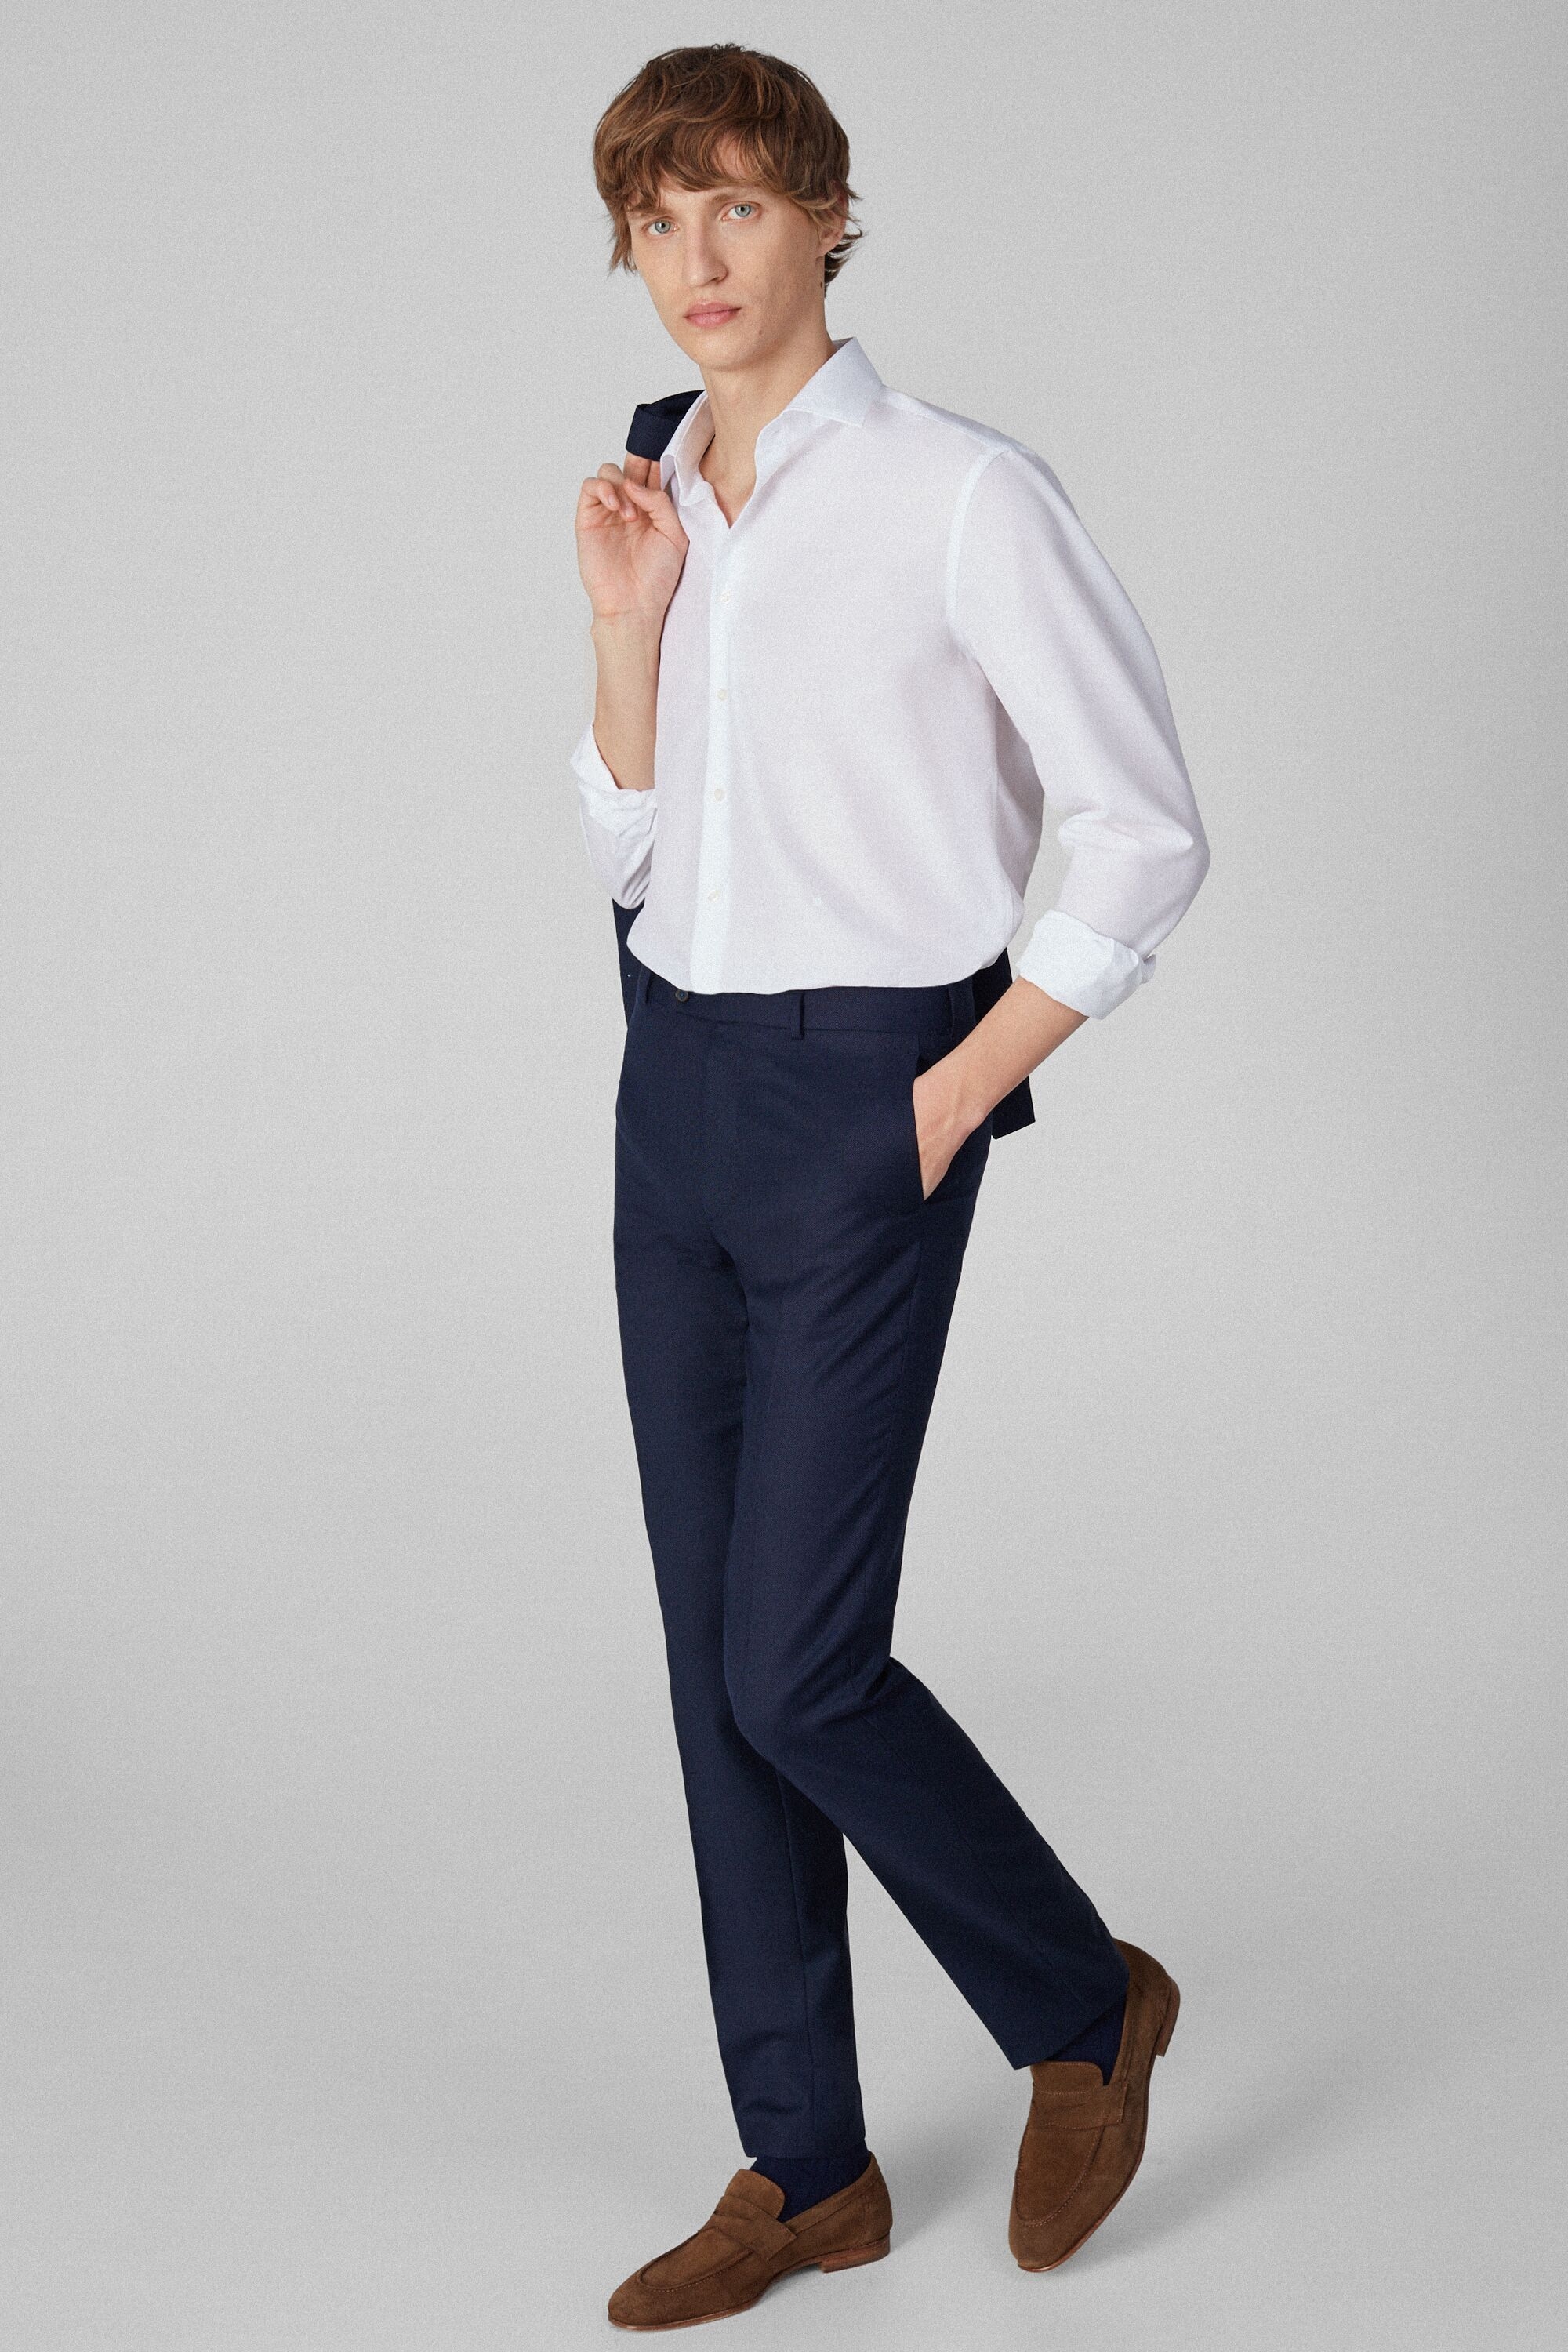 Structured wool classic fit suit trousers